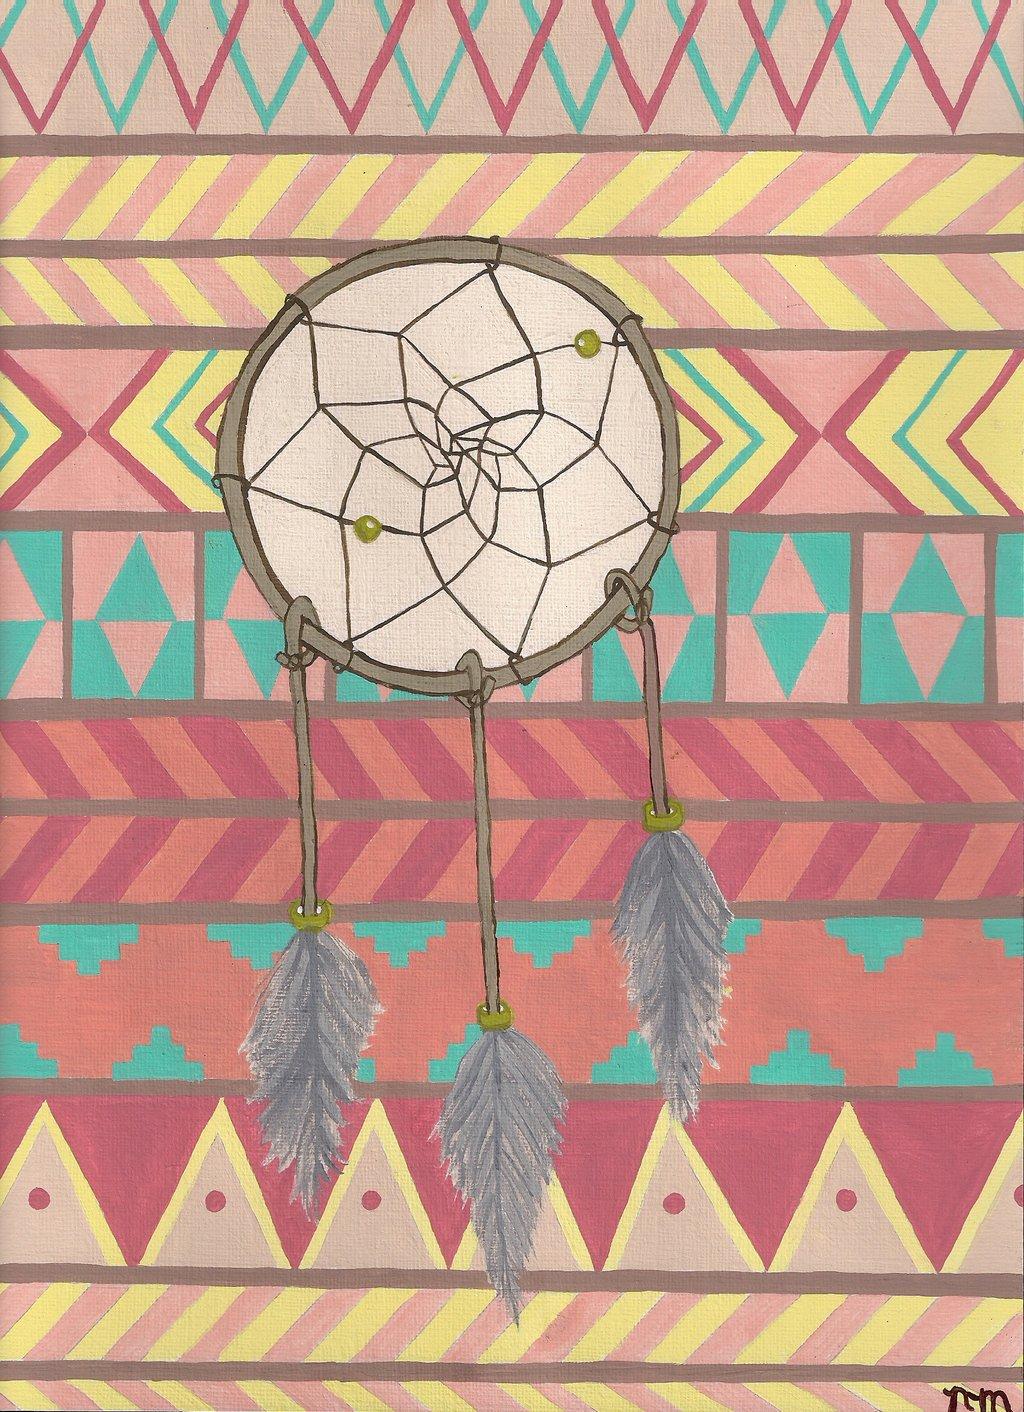 Free download Go Back Image For Cute Dreamcatcher Wallpaper